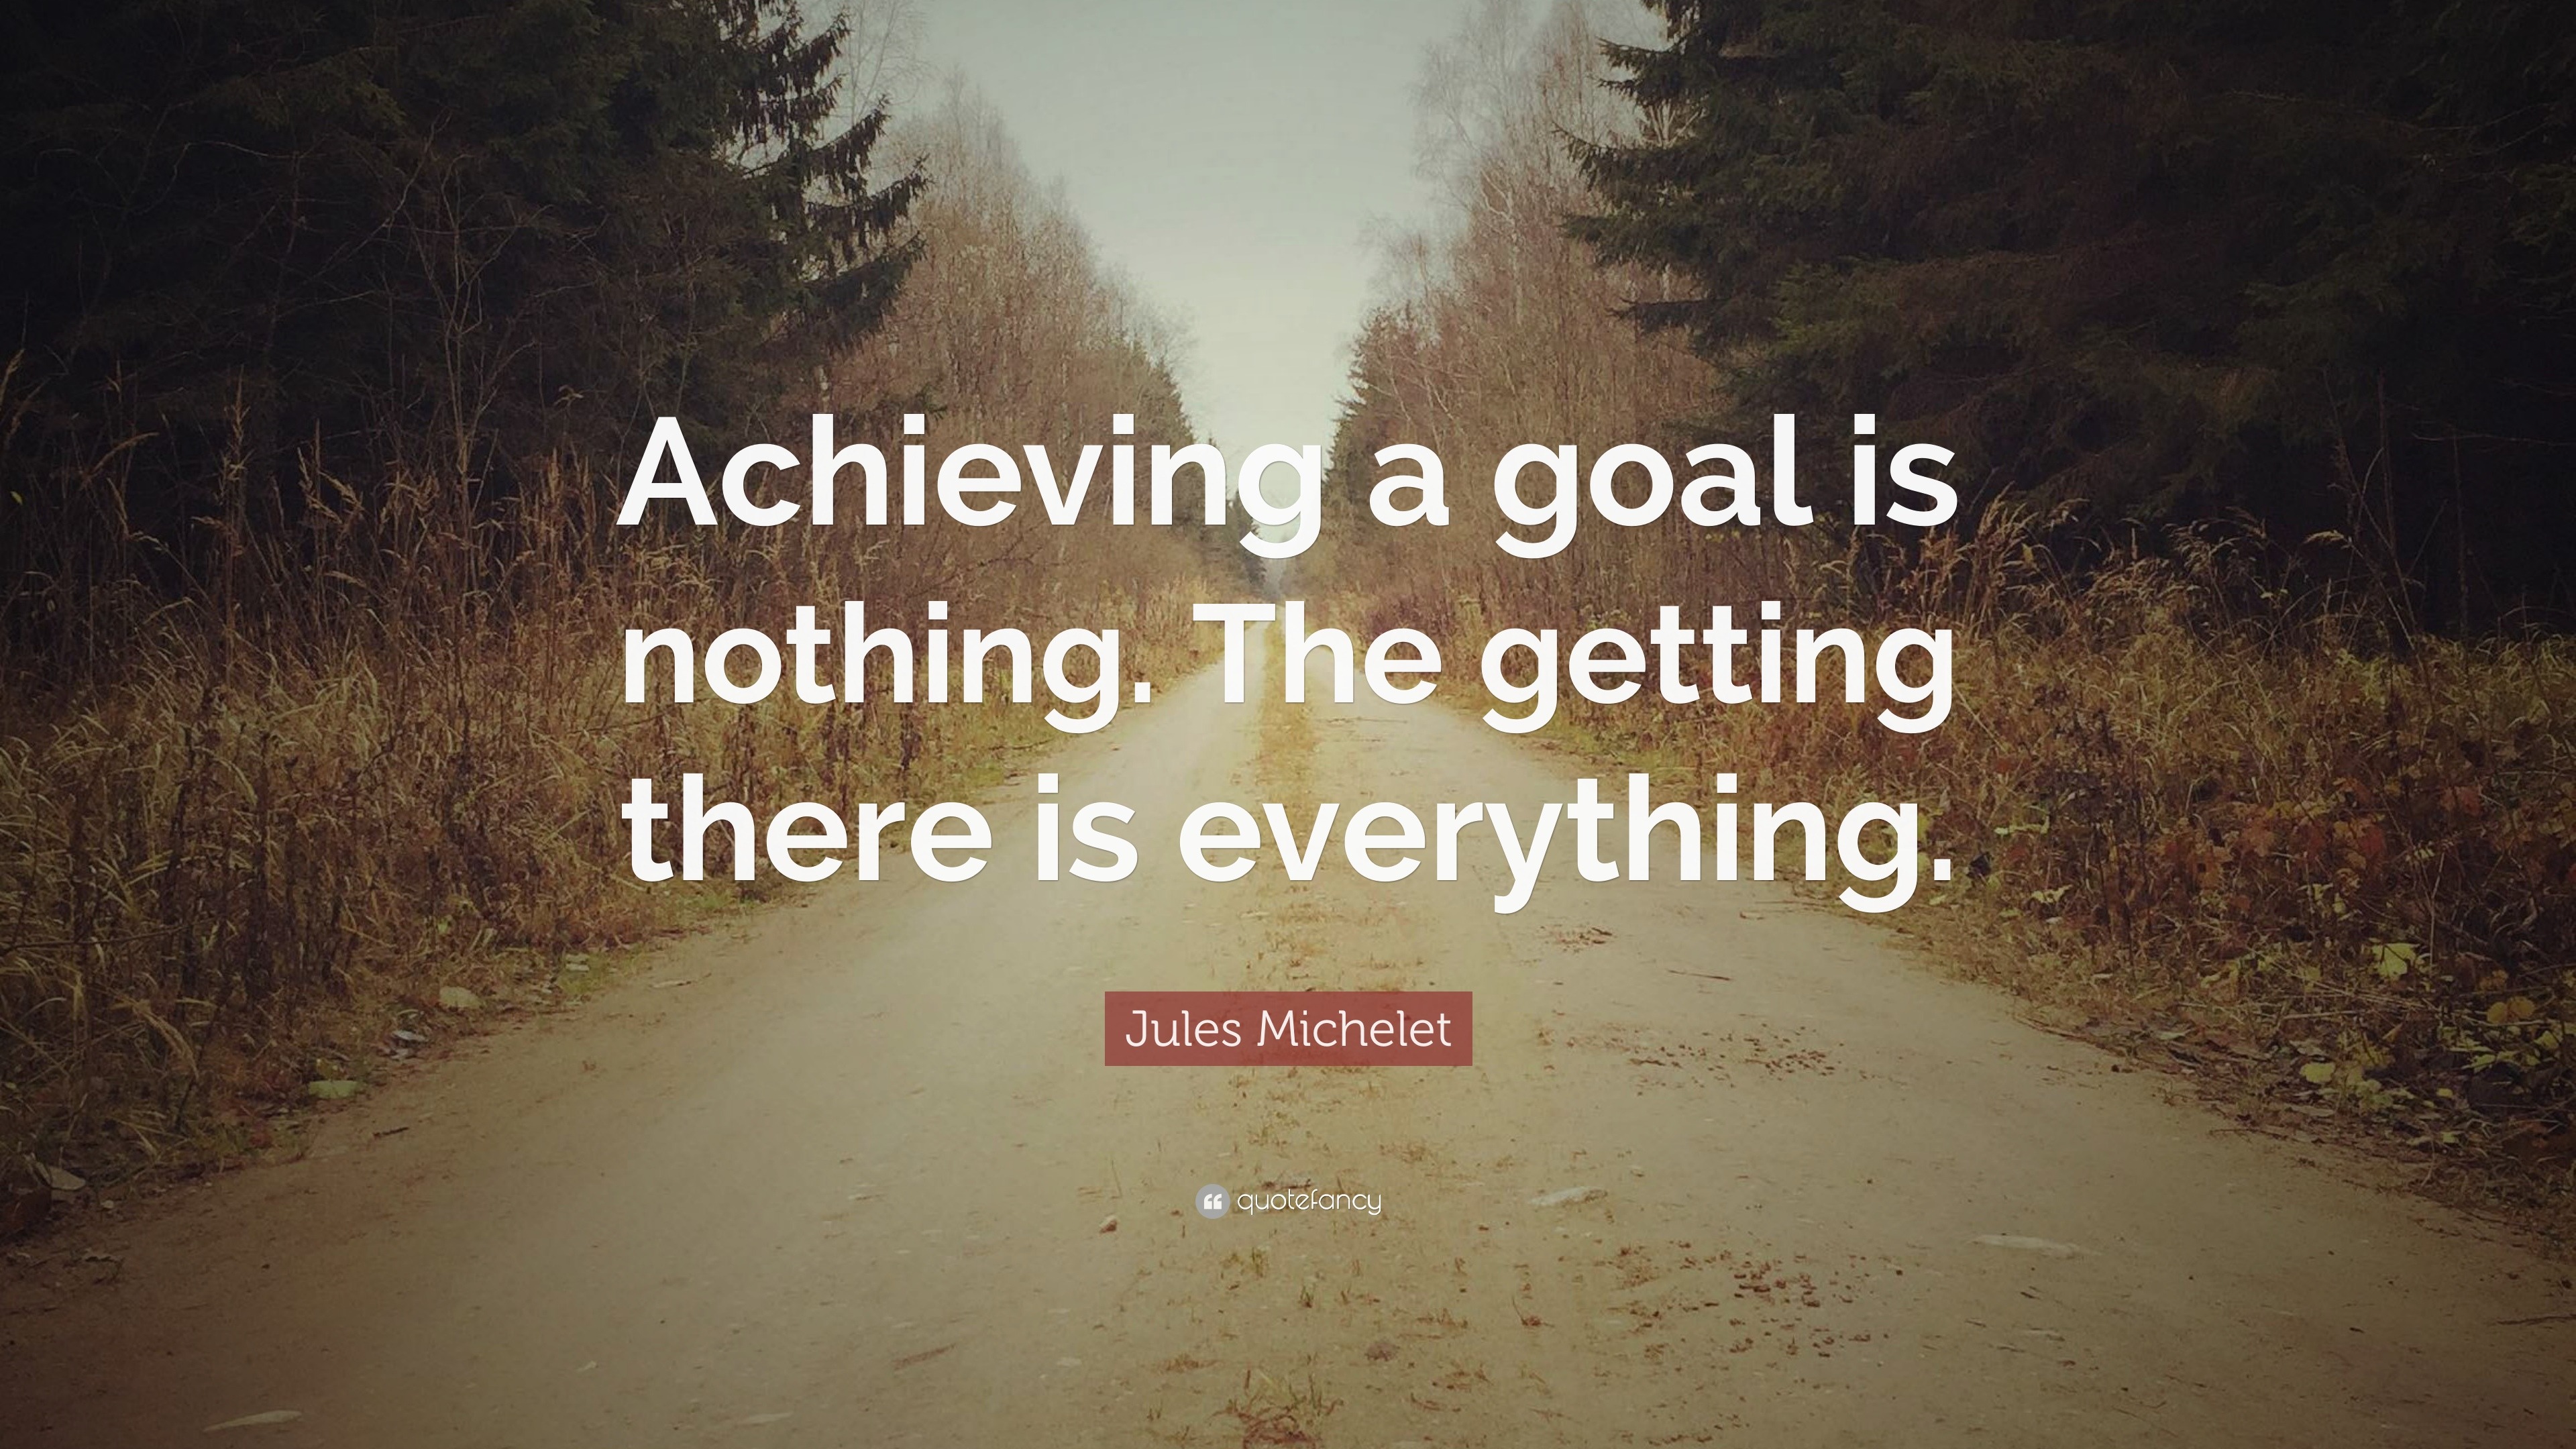 Small Strides, Big Wins: Short Quotes About Achieving Goals